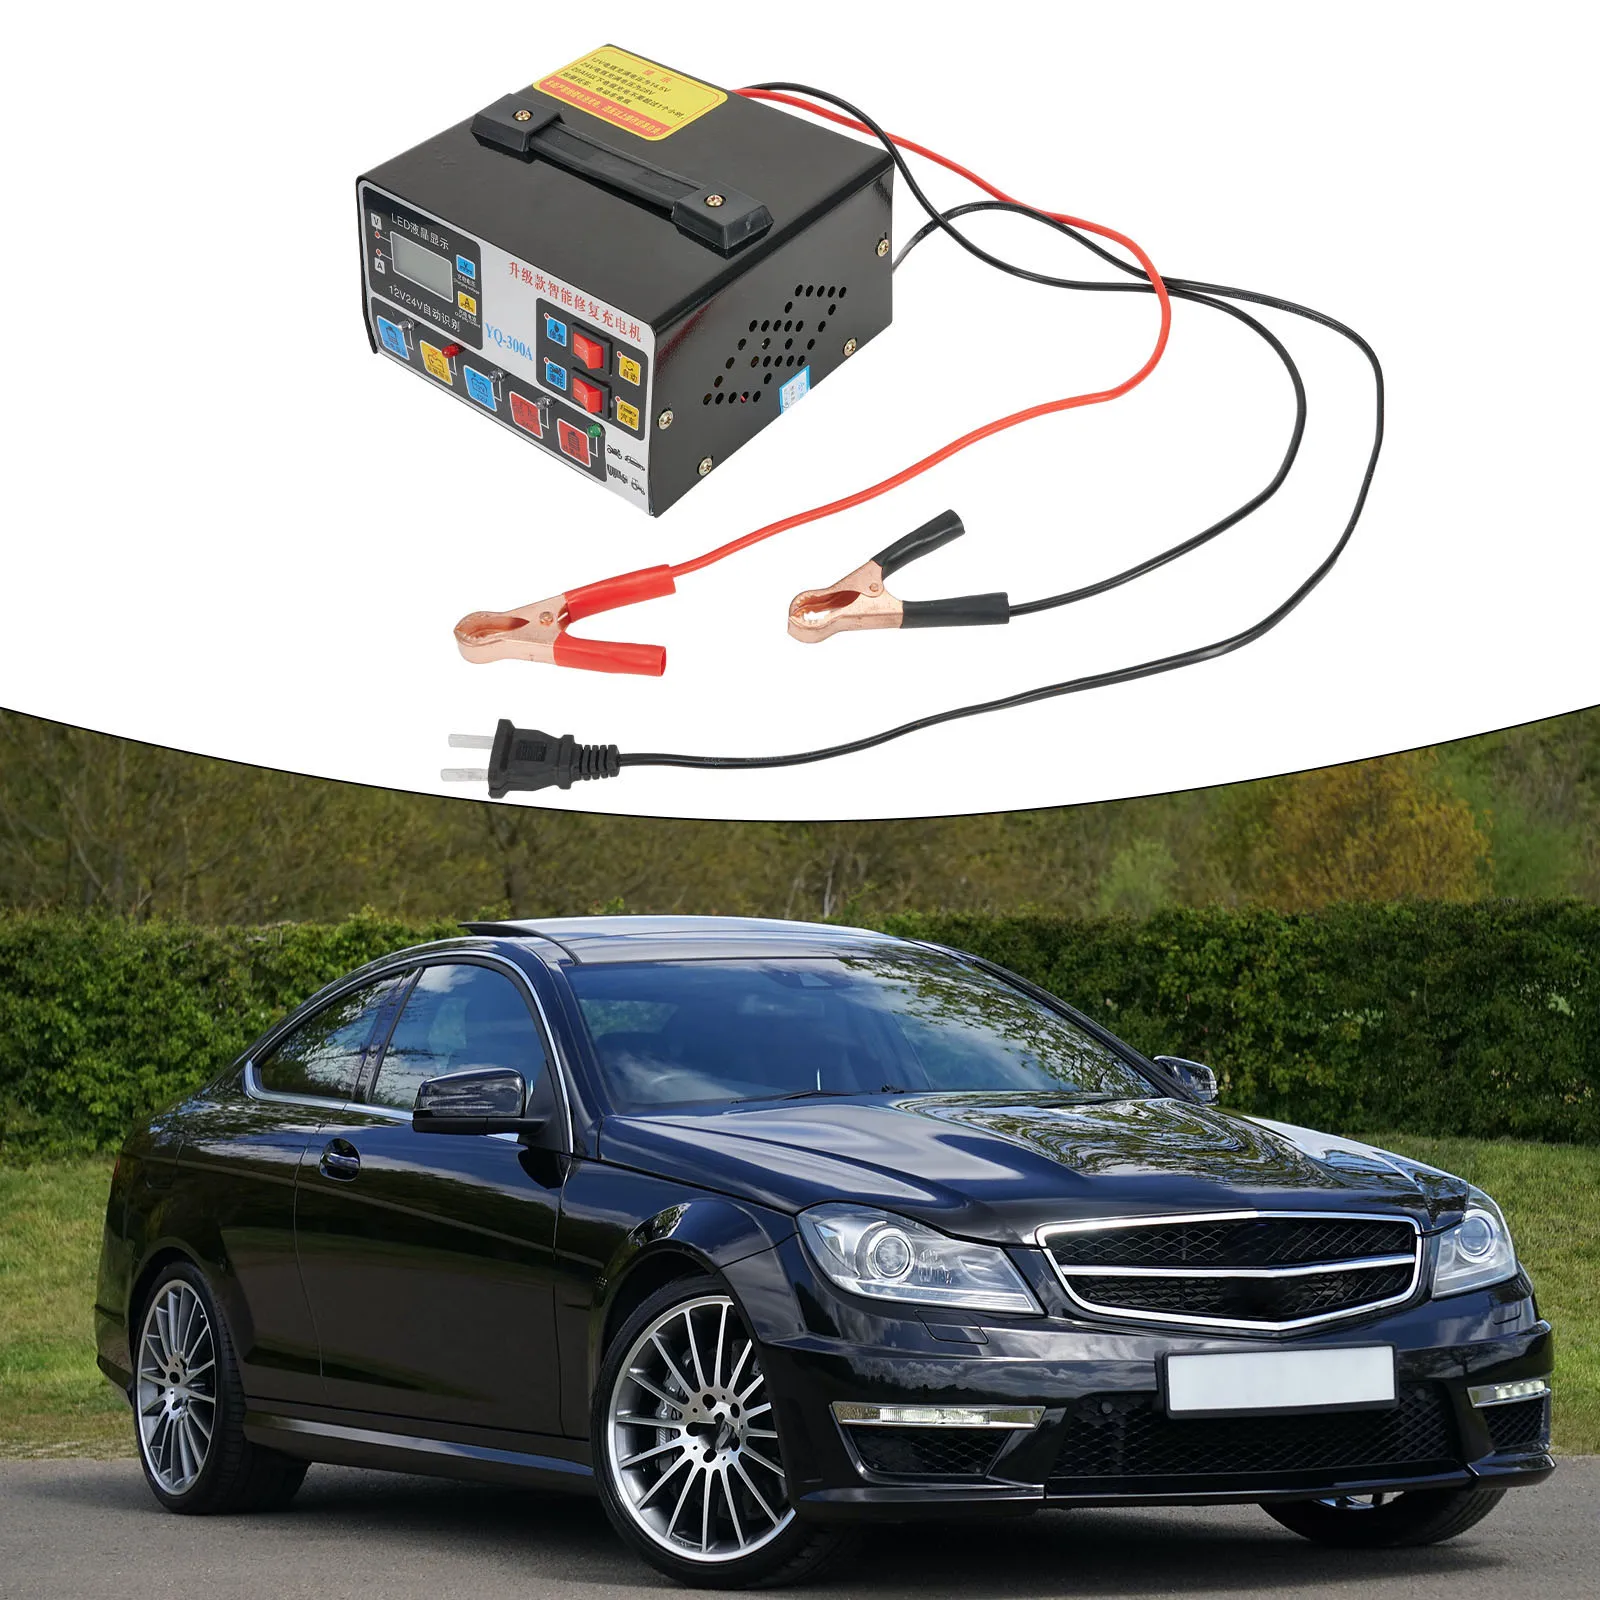 Heavy Duty Smart Vehicle Battery Chargers Automatic Pulse Repair Trickles 12V/24V Auto Charging & Starting Systems Accessories